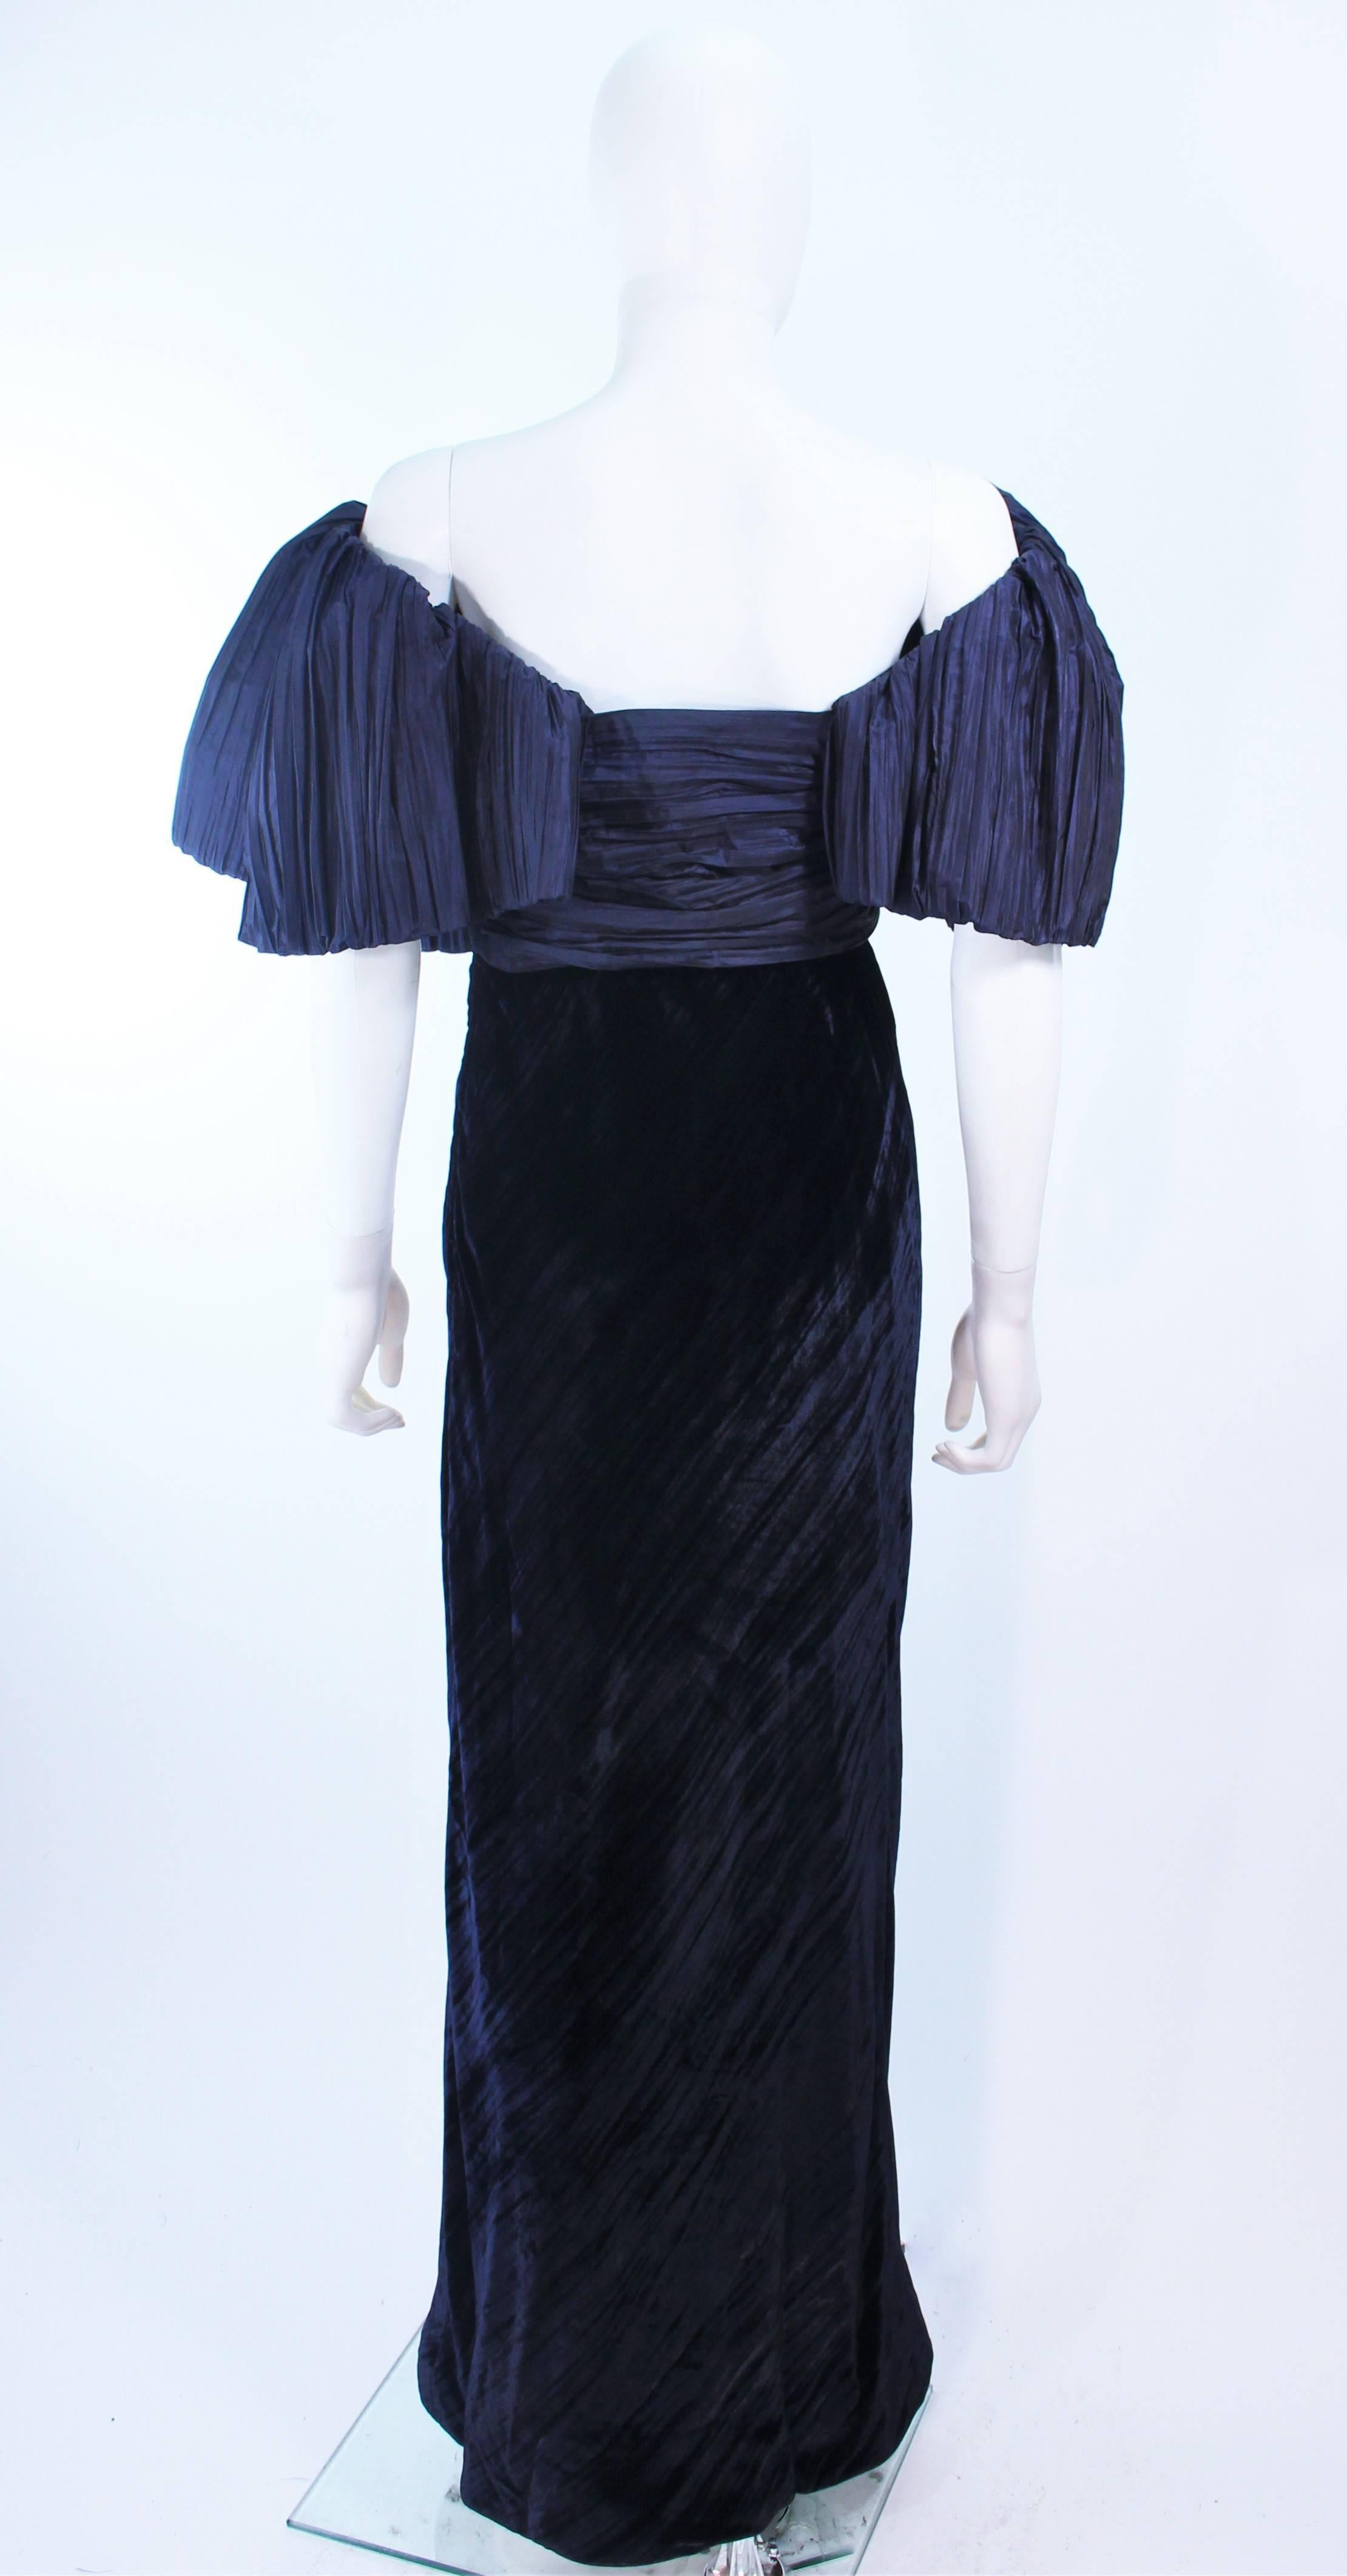 JACQUELINE DE RIBES Gown Navy Bias Velvet and Pleated Bodice Size 6 8 2